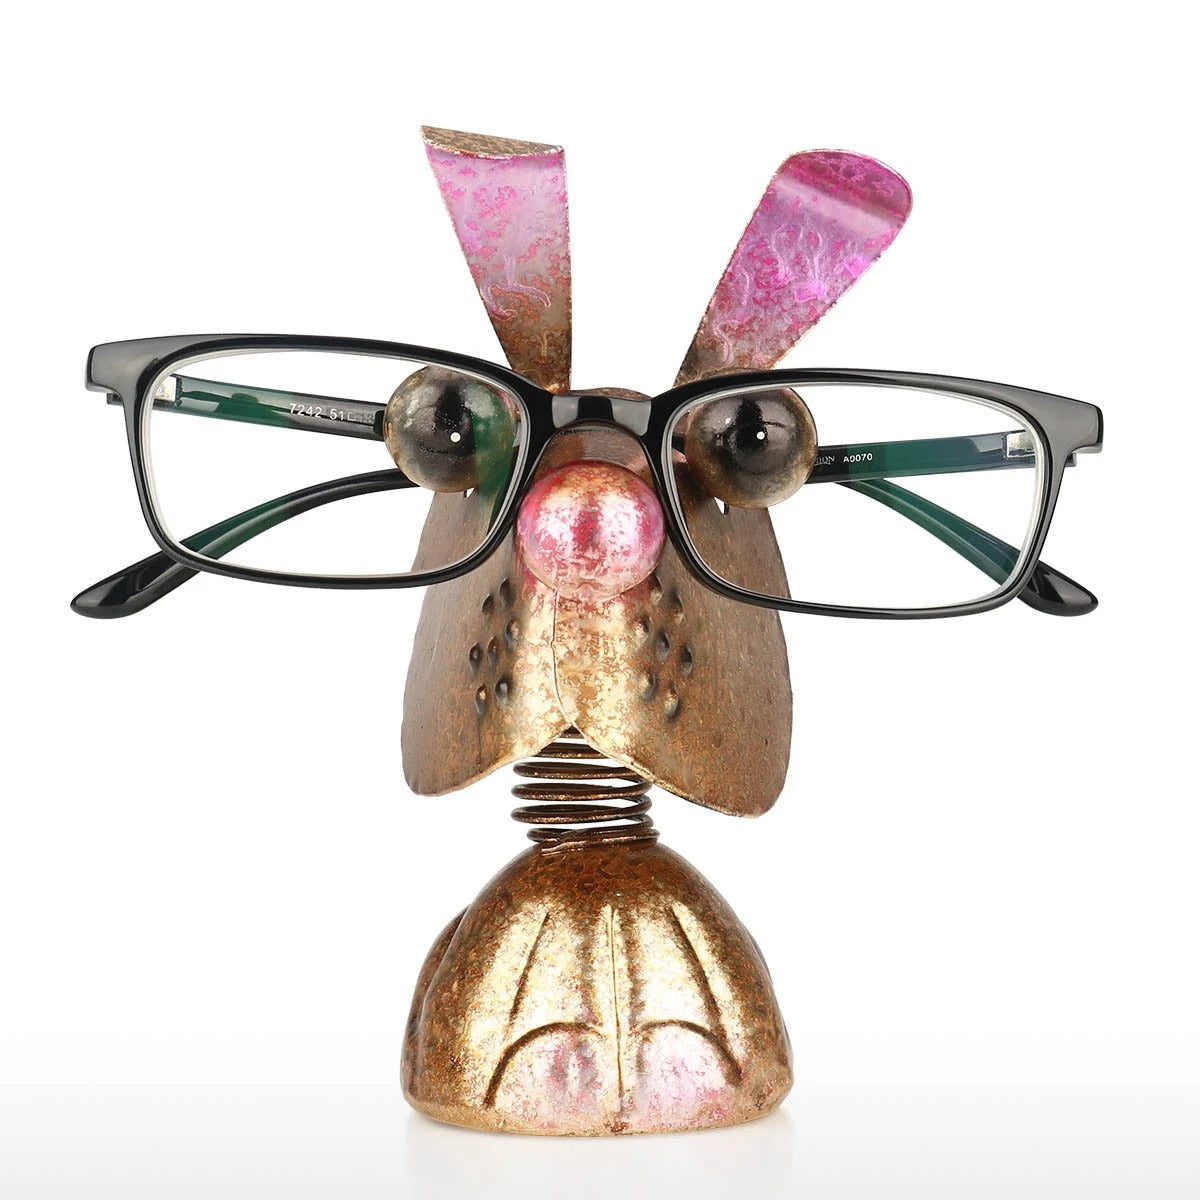 Eyeglass Rack with Rabbit Animal Figurines to Desk Organizer and Desktop Accessories in Business or Home Life